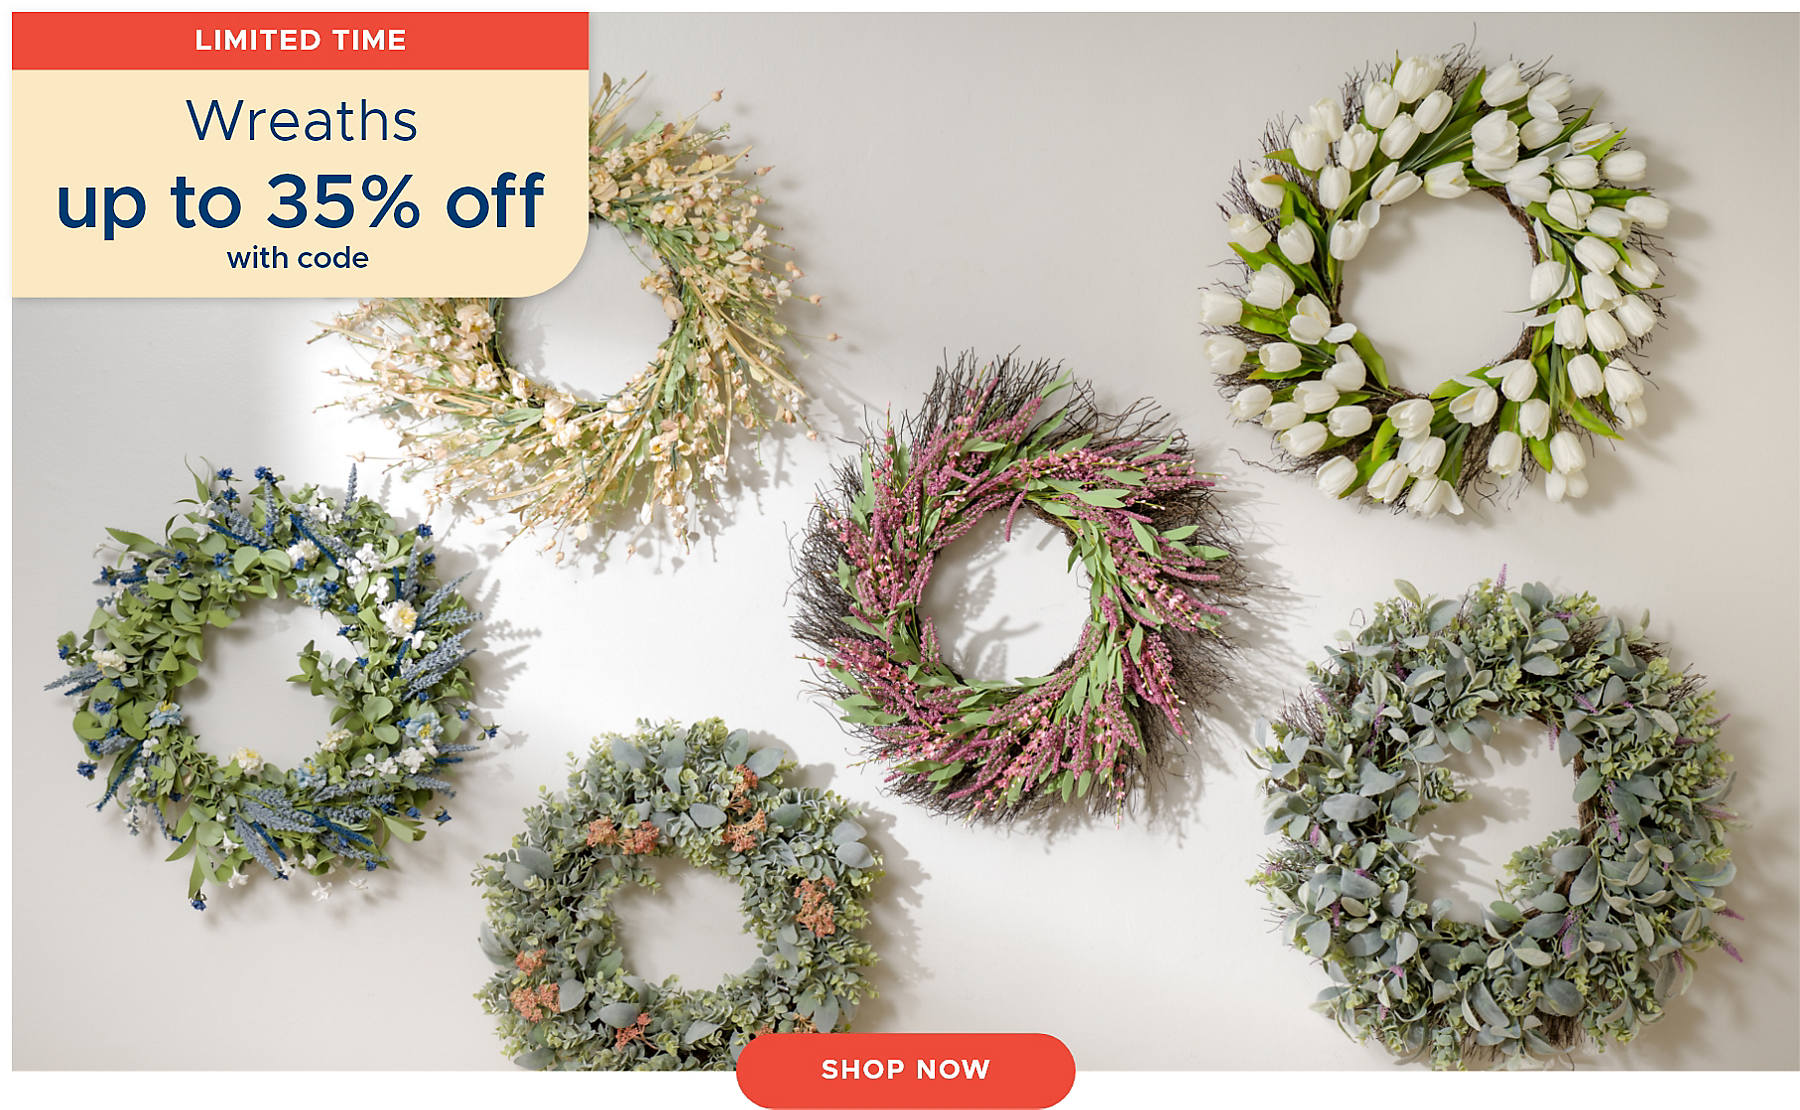 Limited Time Wreaths up to 35% off with code shop now